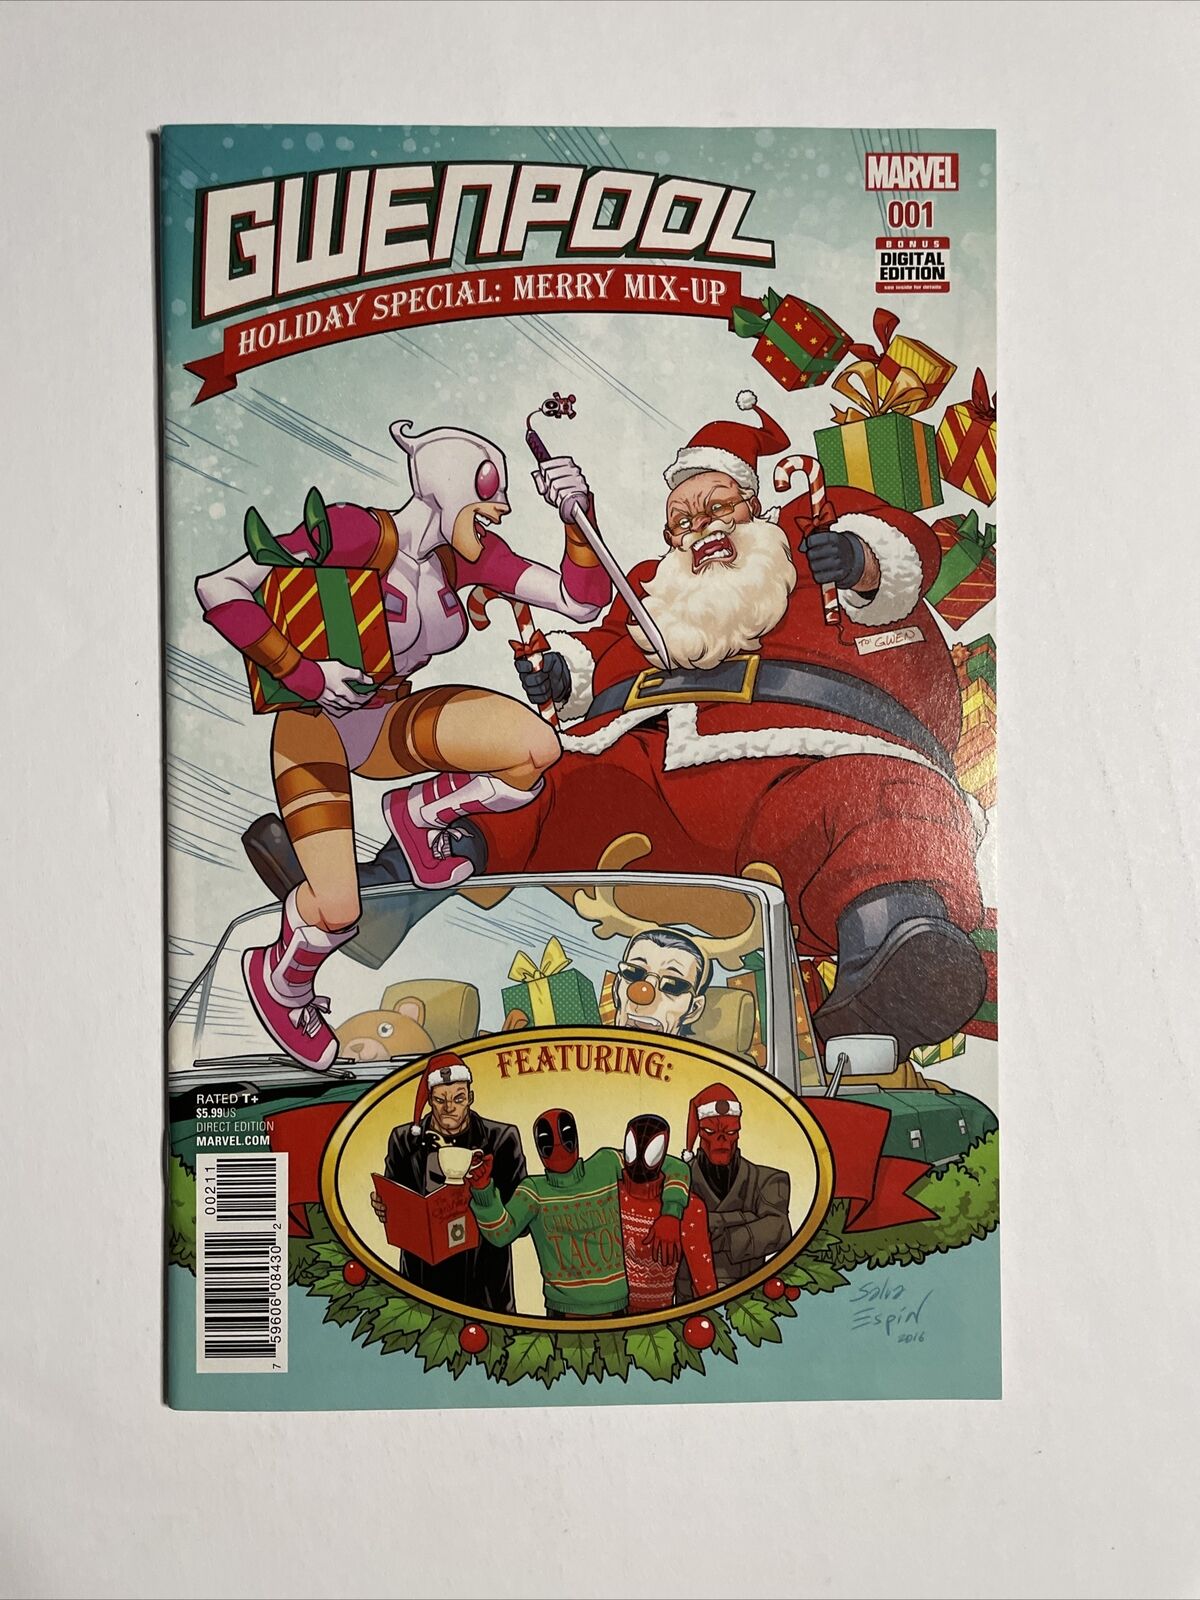 Gwenpool: Holiday Special #1 (2017) 9.4 NM Marvel Merry Mix-Up Christmas Comic